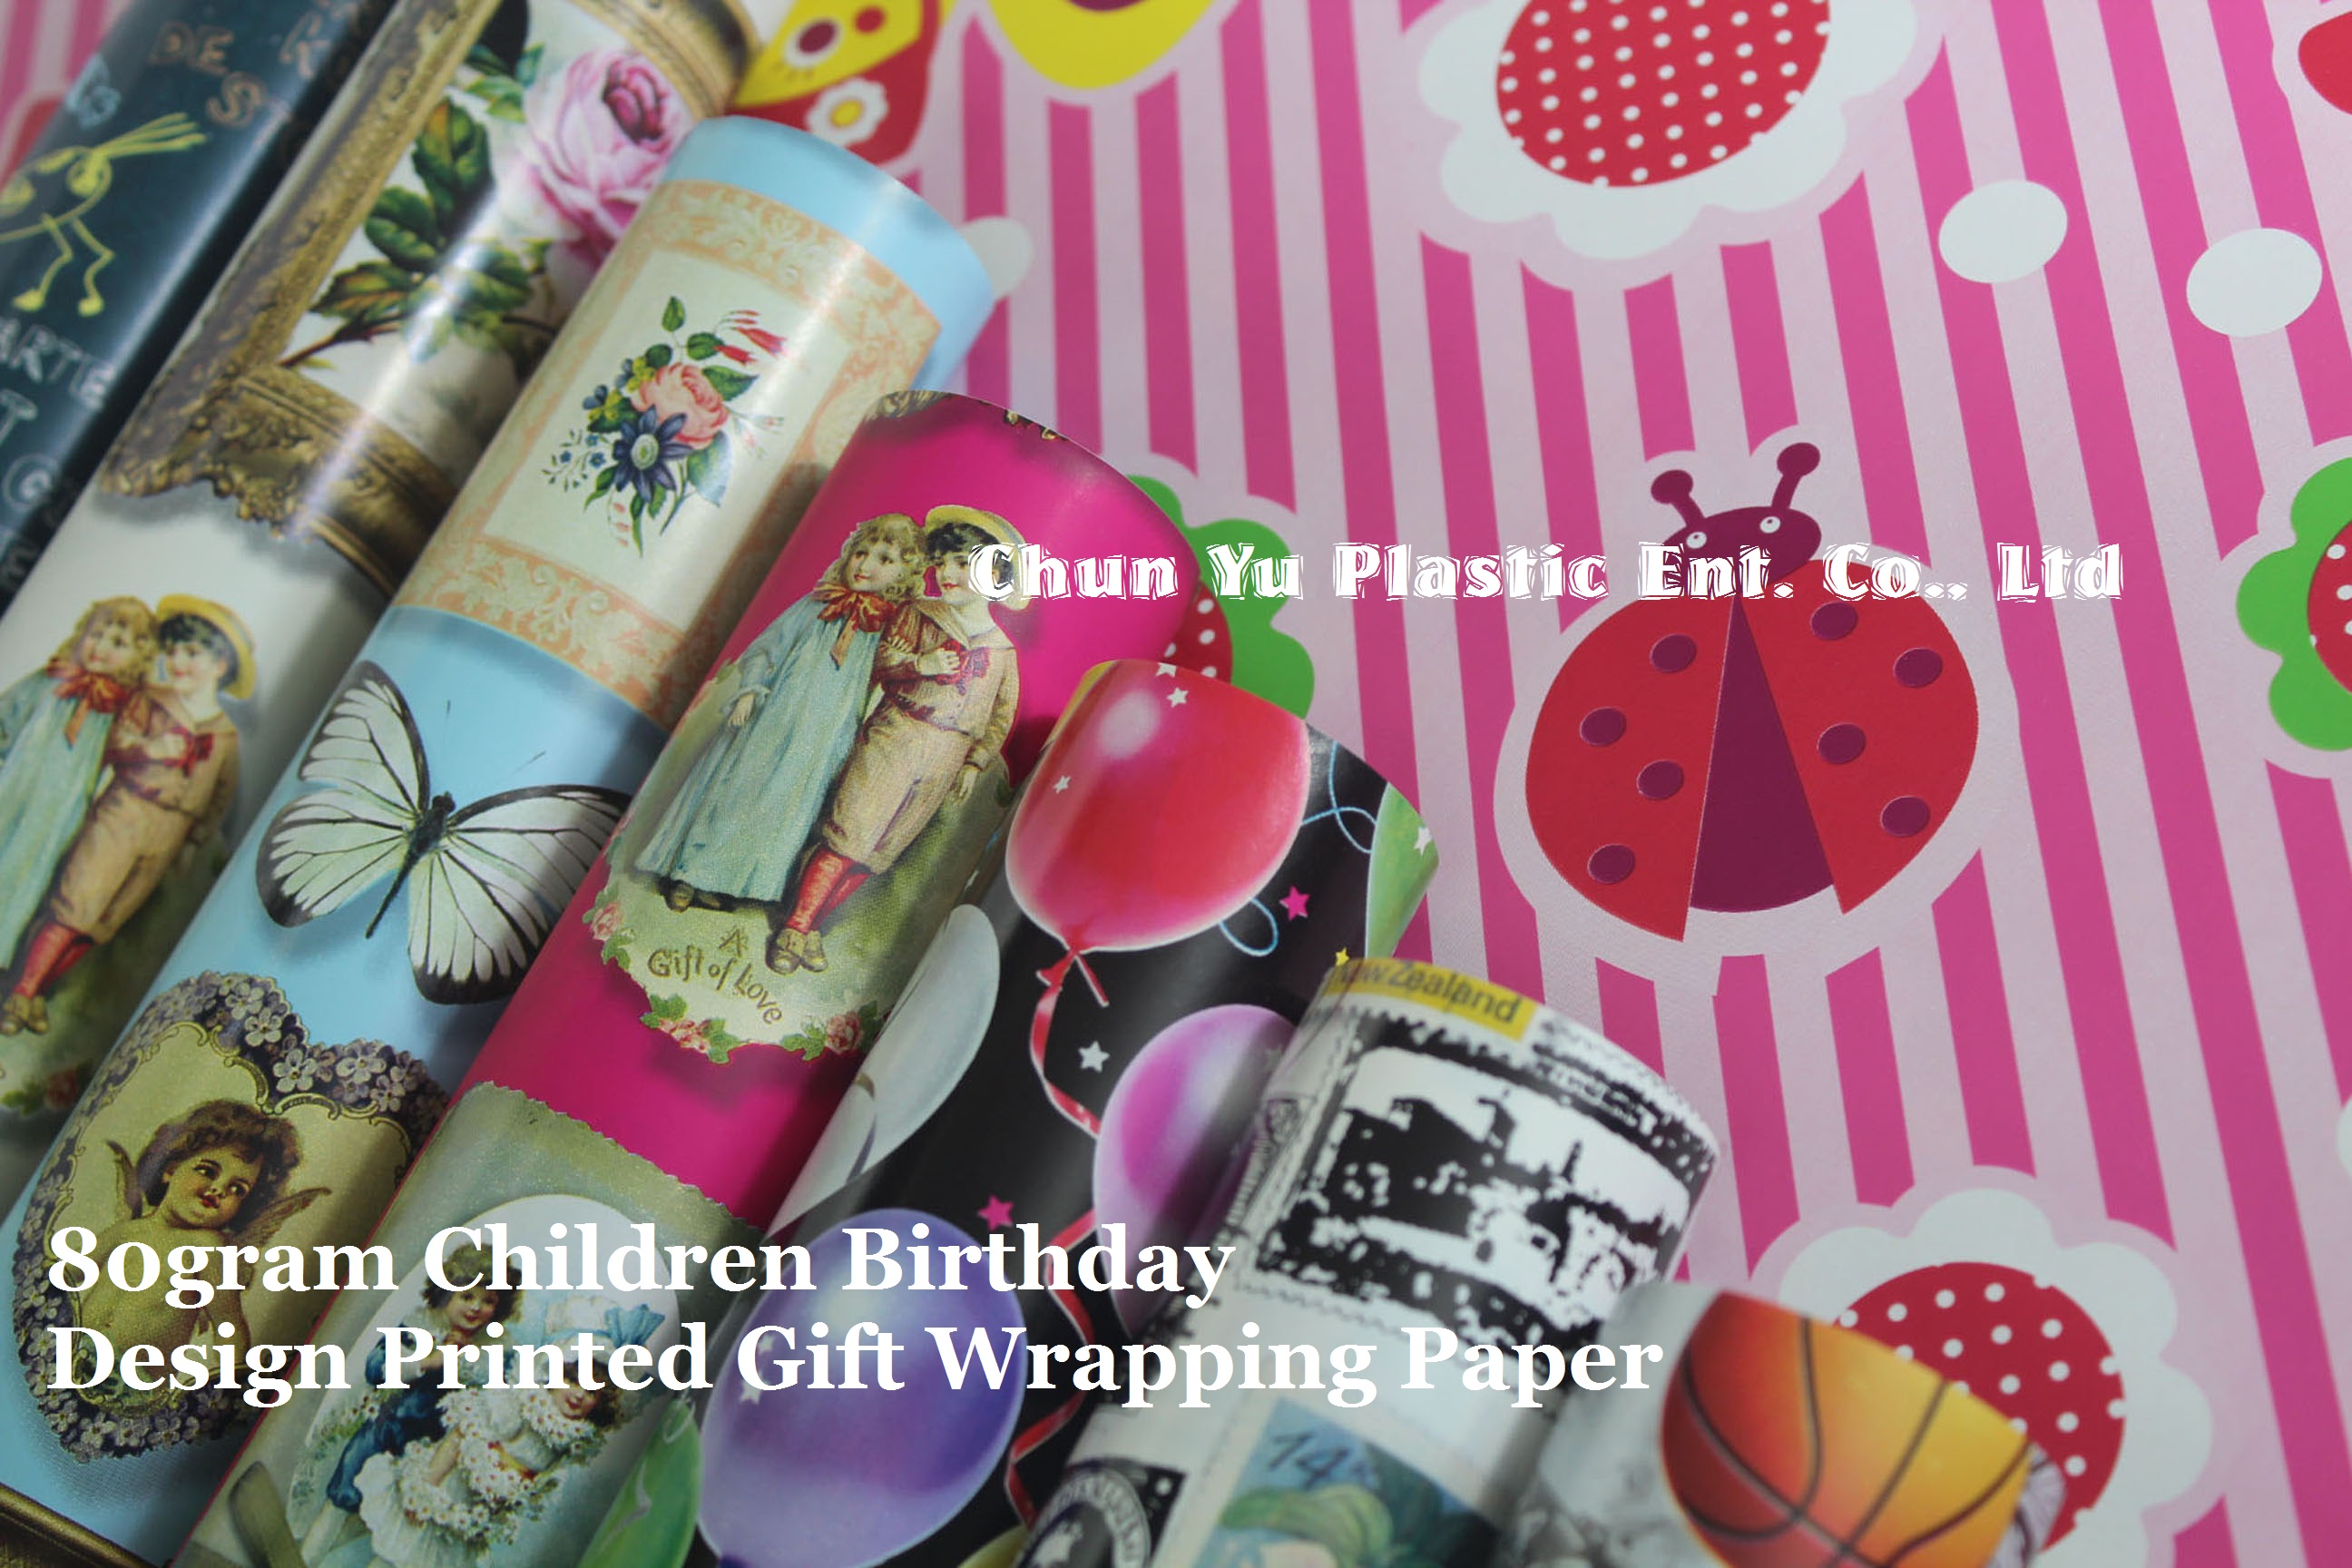 80gram luxury gift wrapping paper printed with baby girls and boys designs for children birthday celebrations